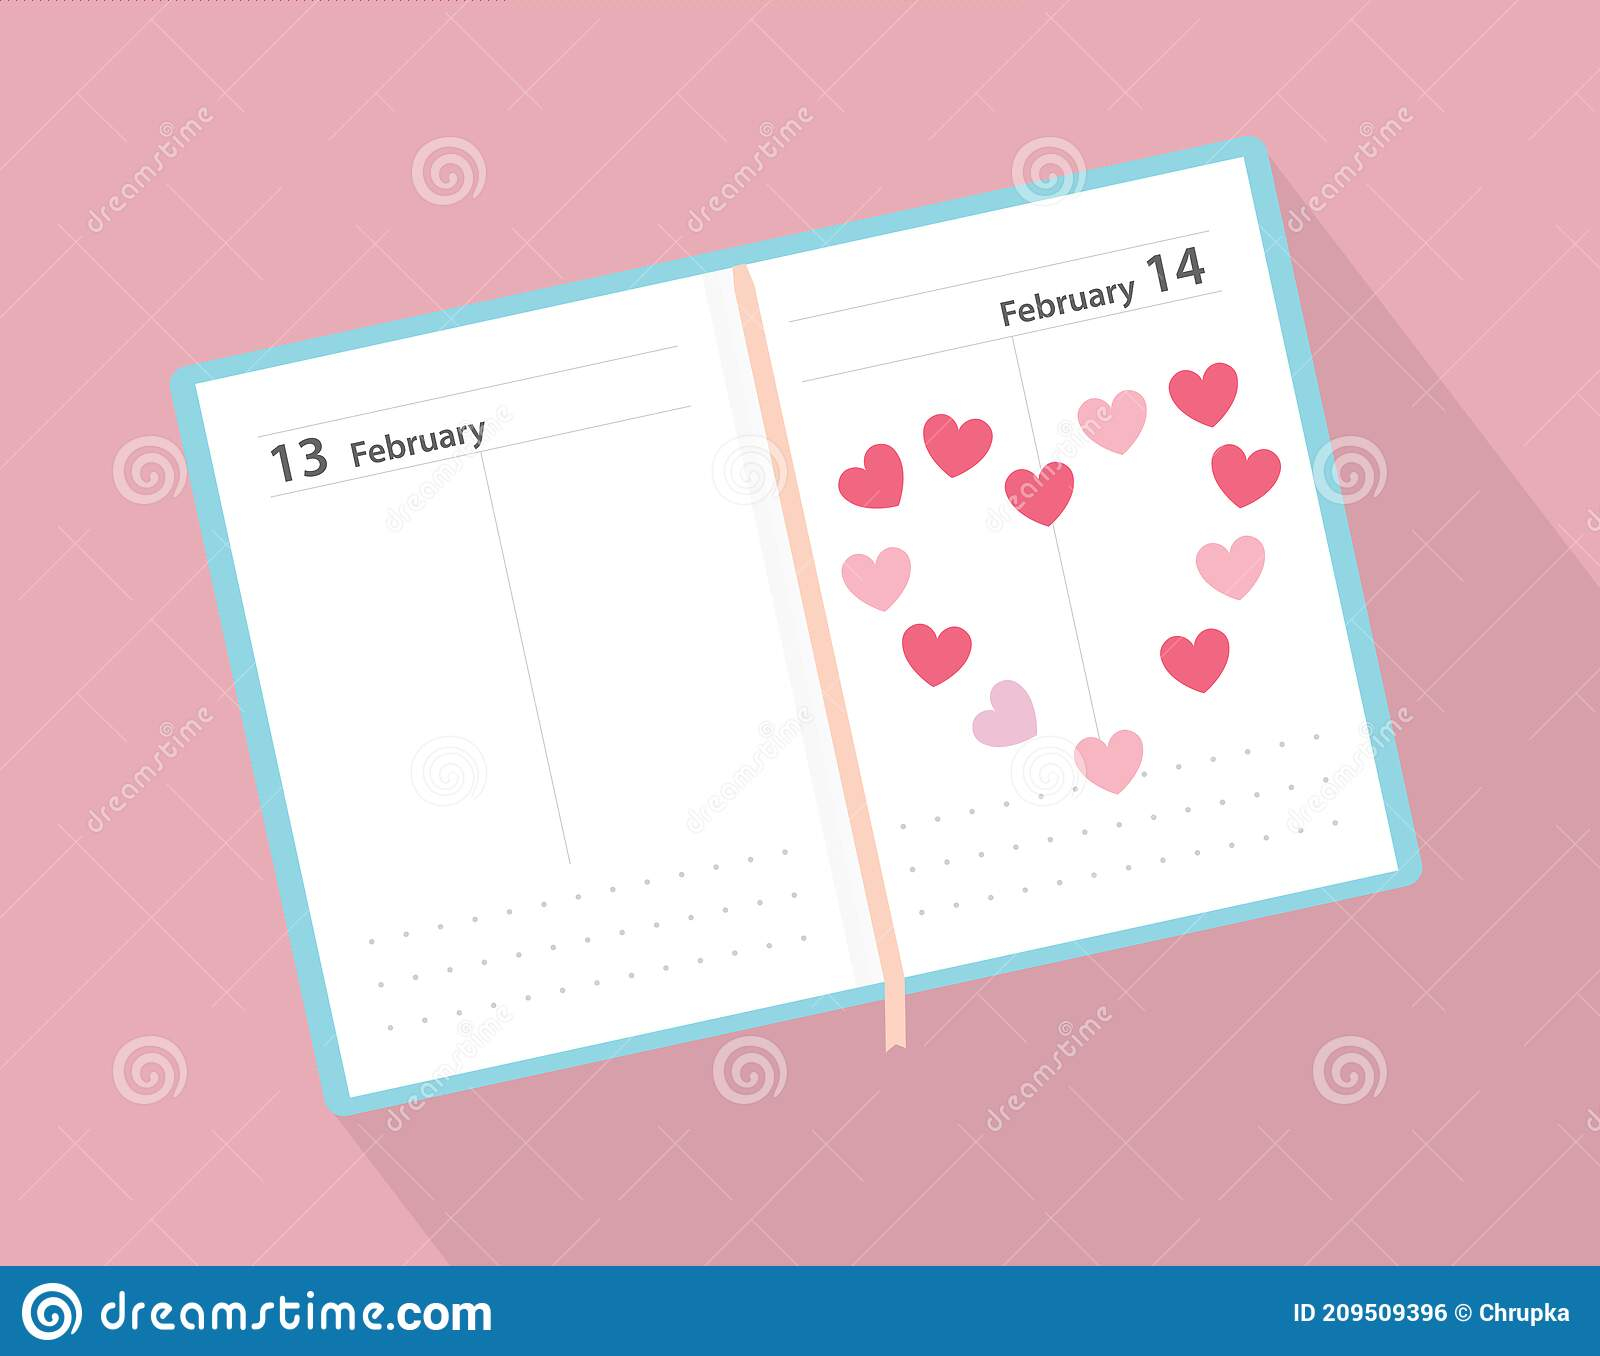 Open Calendar With 14 February Valentine s Day Date And Heart Stock